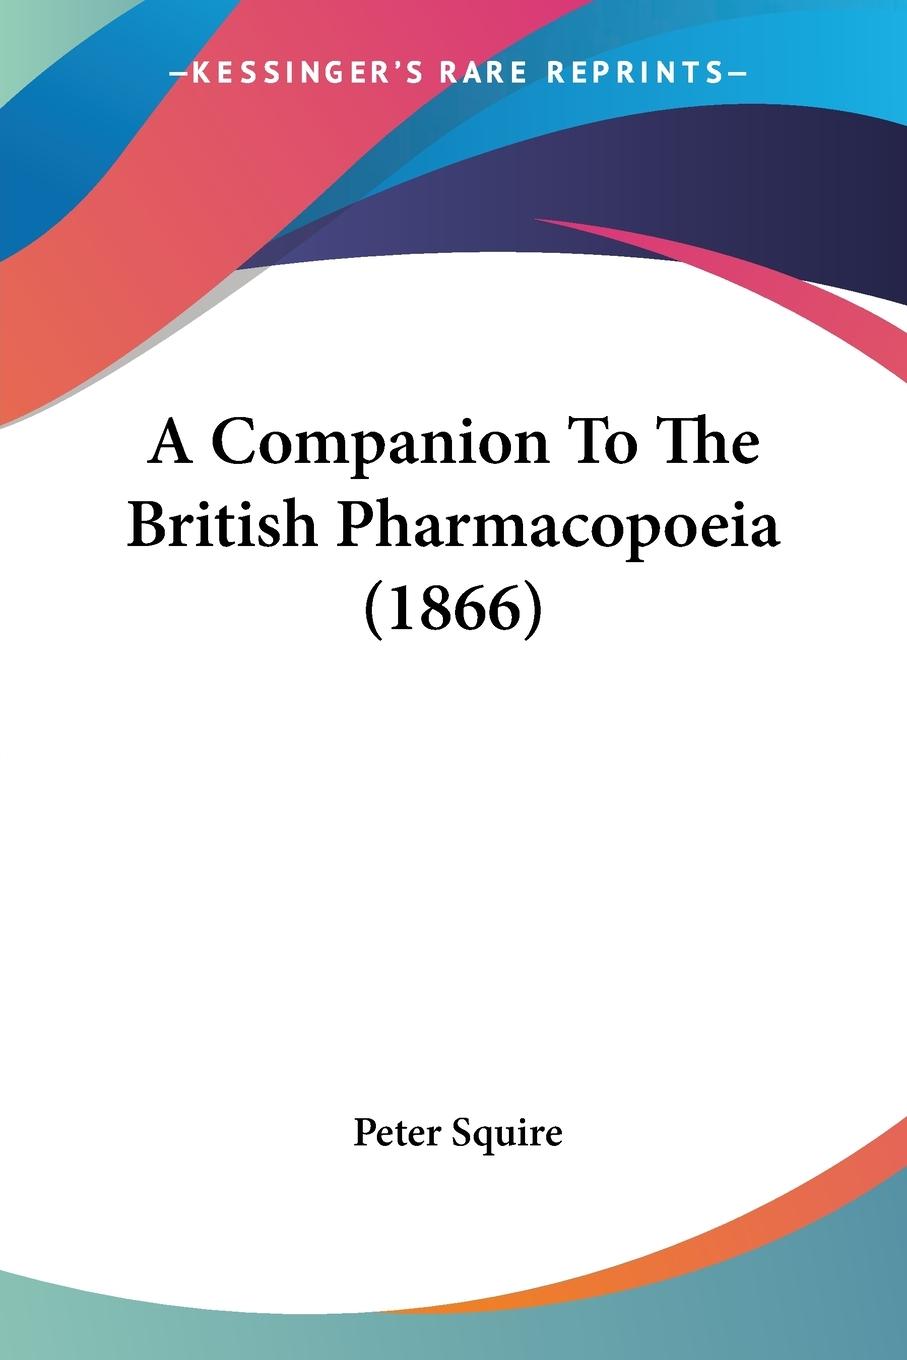 A Companion To The British Pharmacopoeia (1866) - Squire, Peter